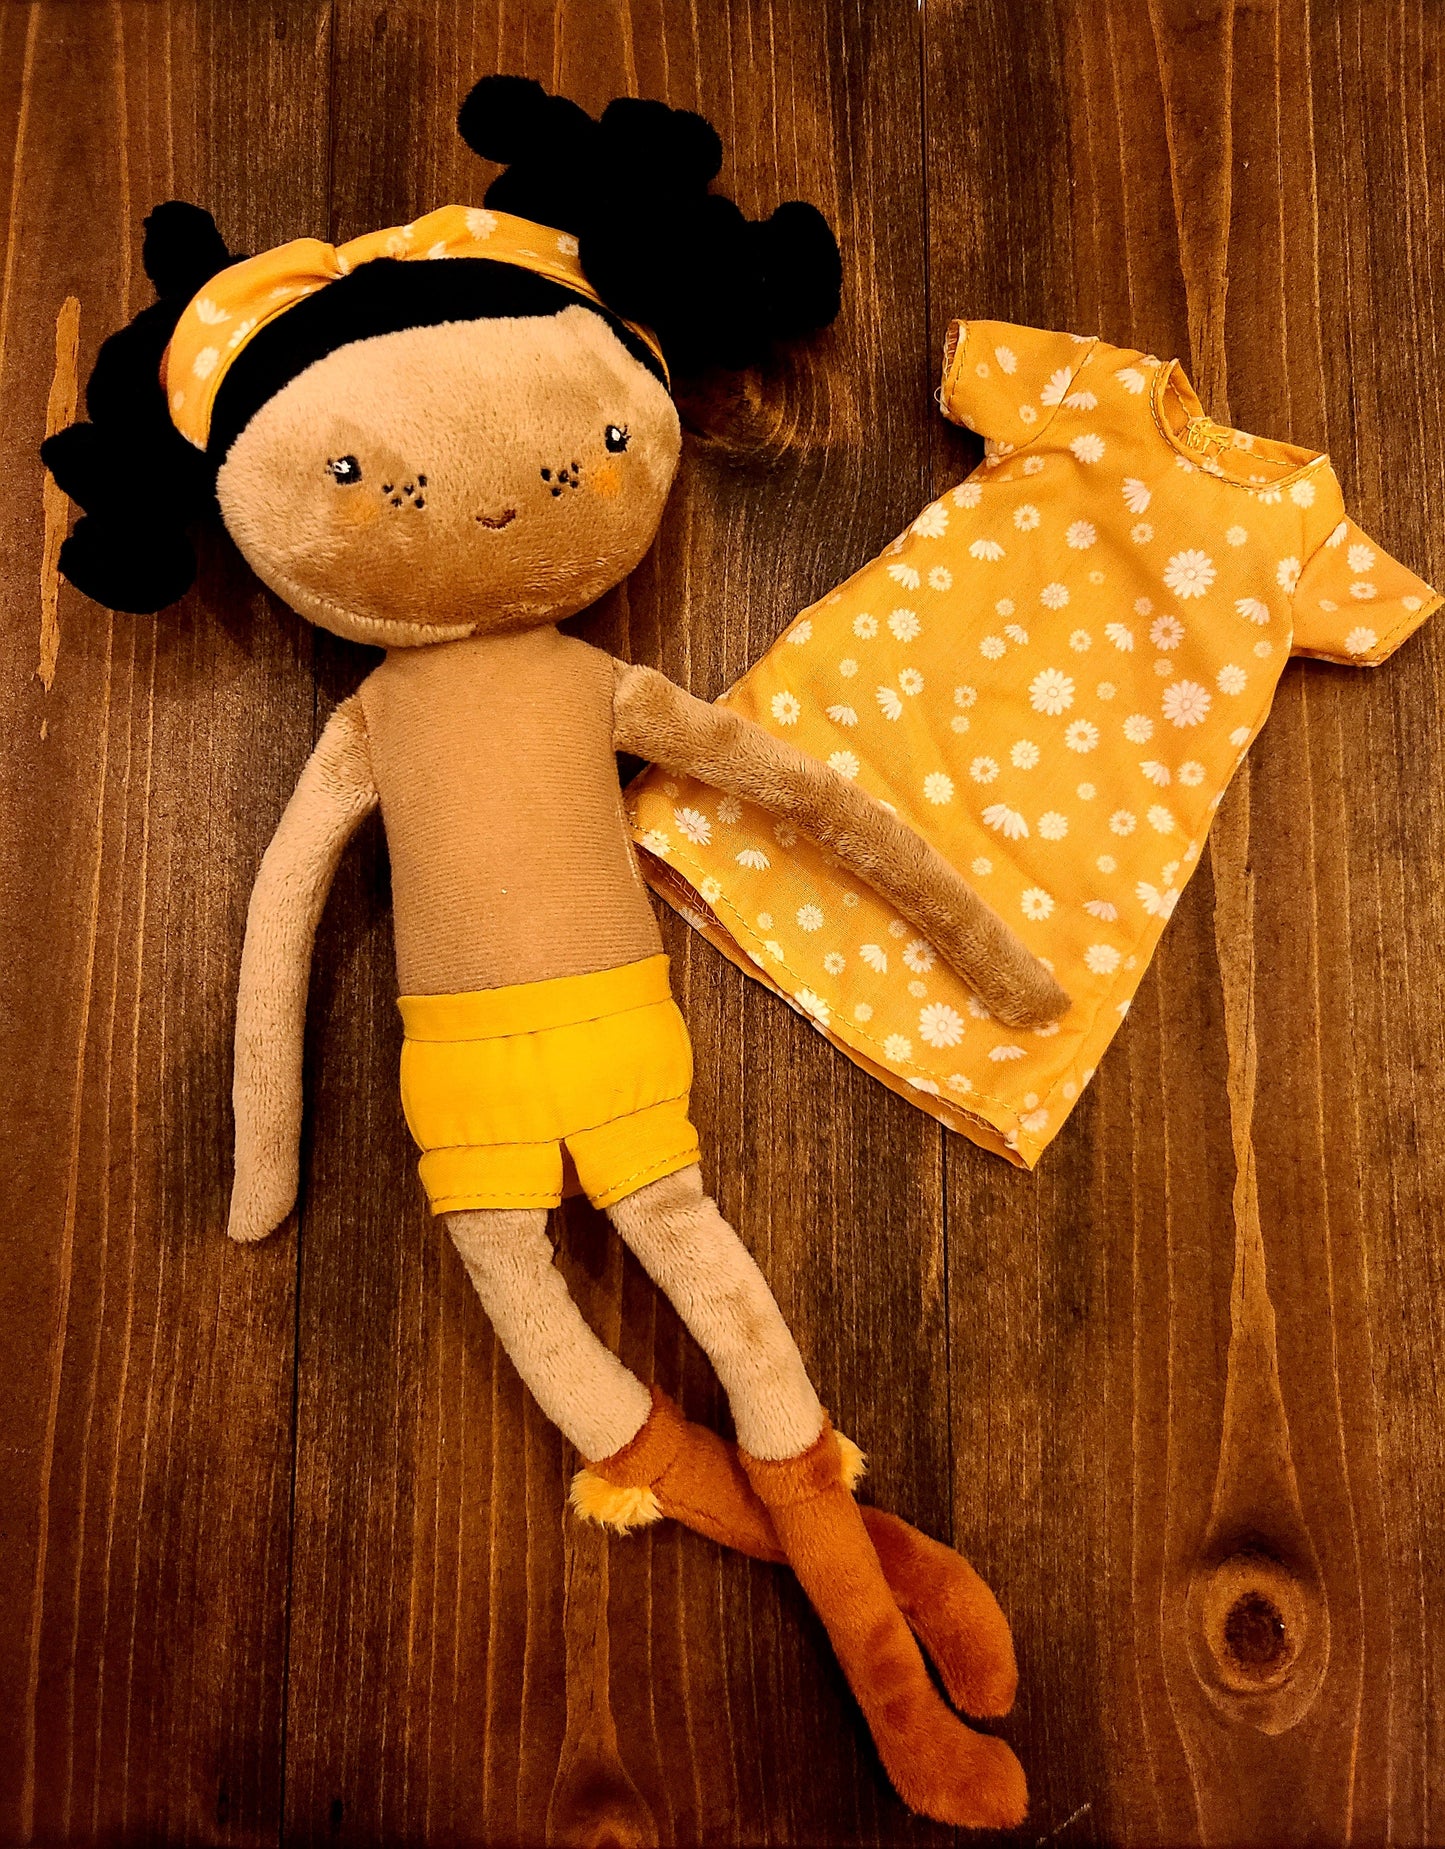 Personalized Evi Soft Rag 13" Brown Girl Plush Doll With Mustard Flower Dress/ Baby Gift Toy